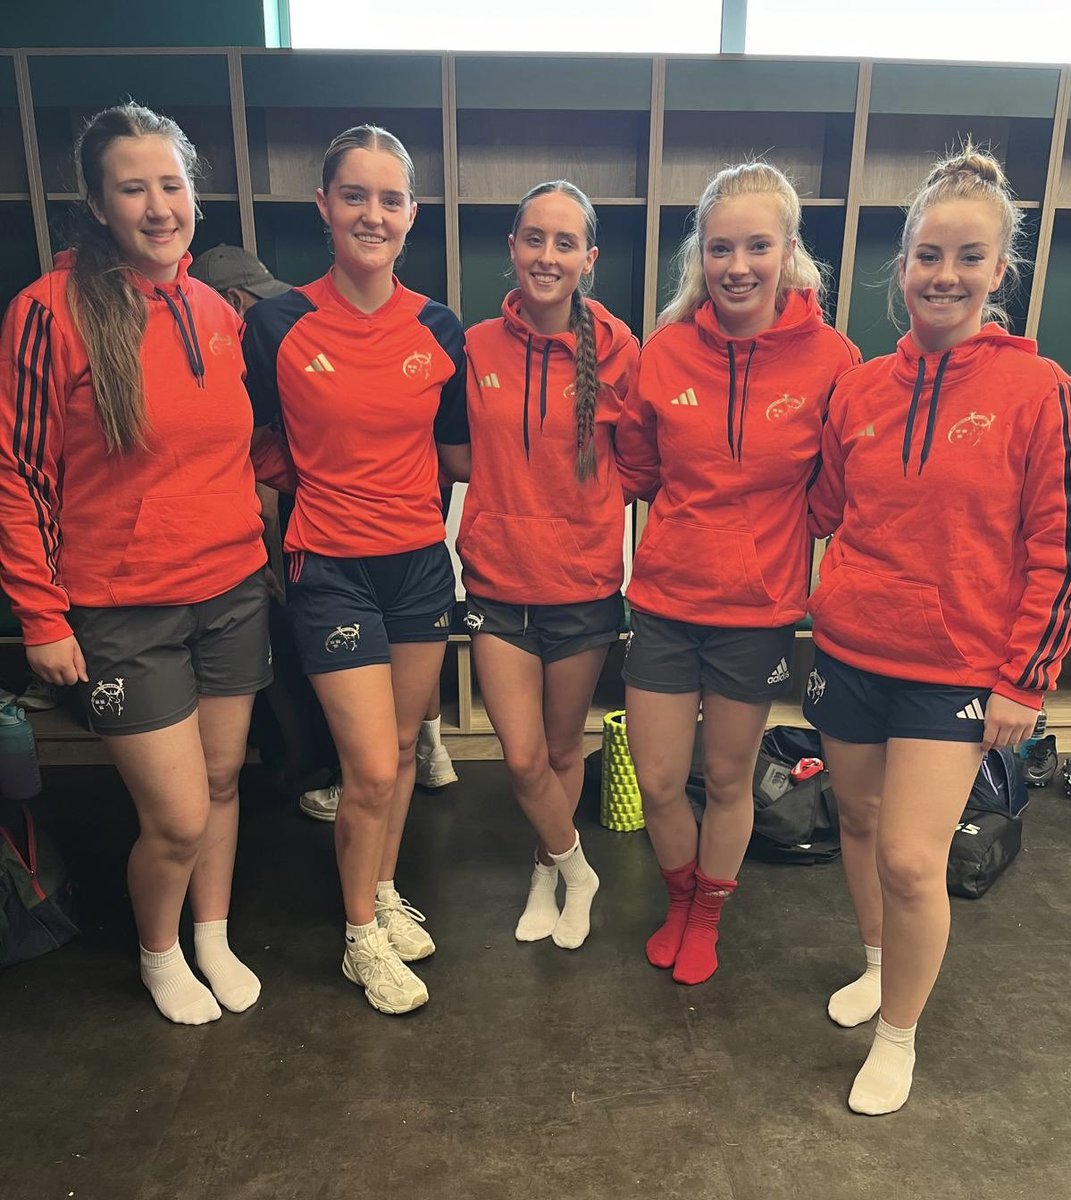 Brilliant to see Orlaith grimes, Katie Hehir, Hannah Hehir, Olivia McMahon and Charlie Dillon playing 7’s inter-pros with @Munsterrugby in Dublin yesterday #ThereIsAnIsle